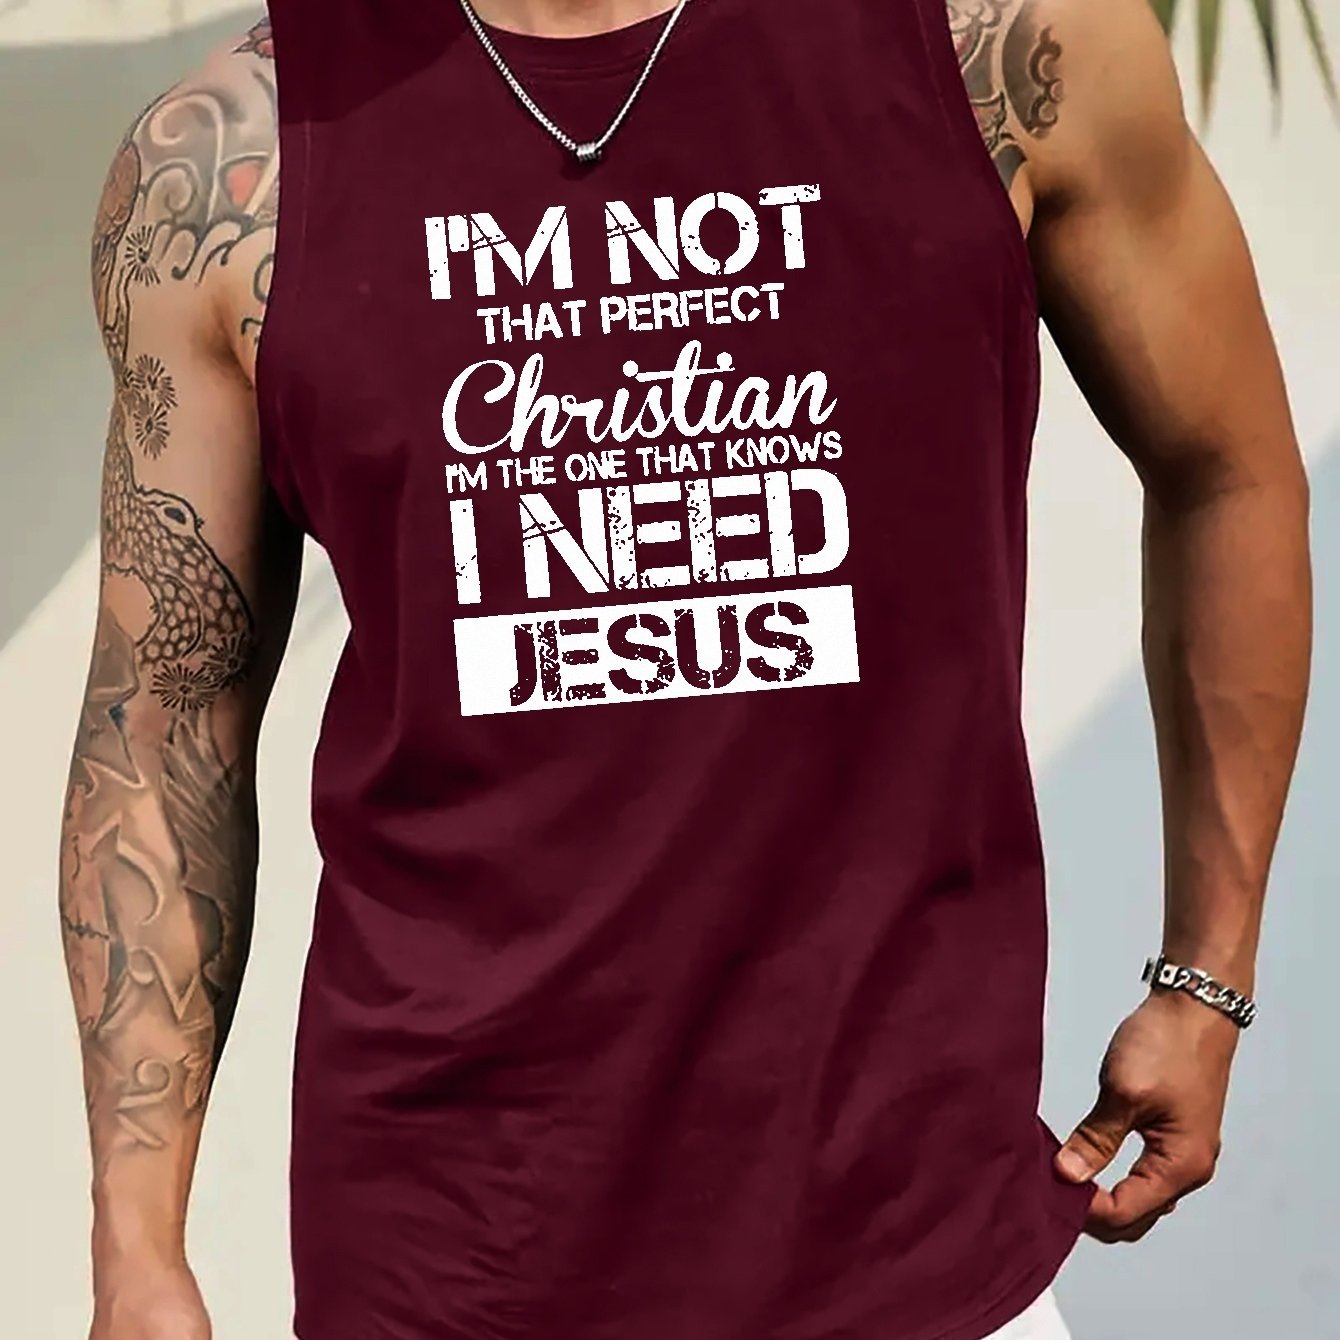 I'm Not That Perfect Christian...I Need Jesus Plus Size Men's Christian Tank Top claimedbygoddesigns